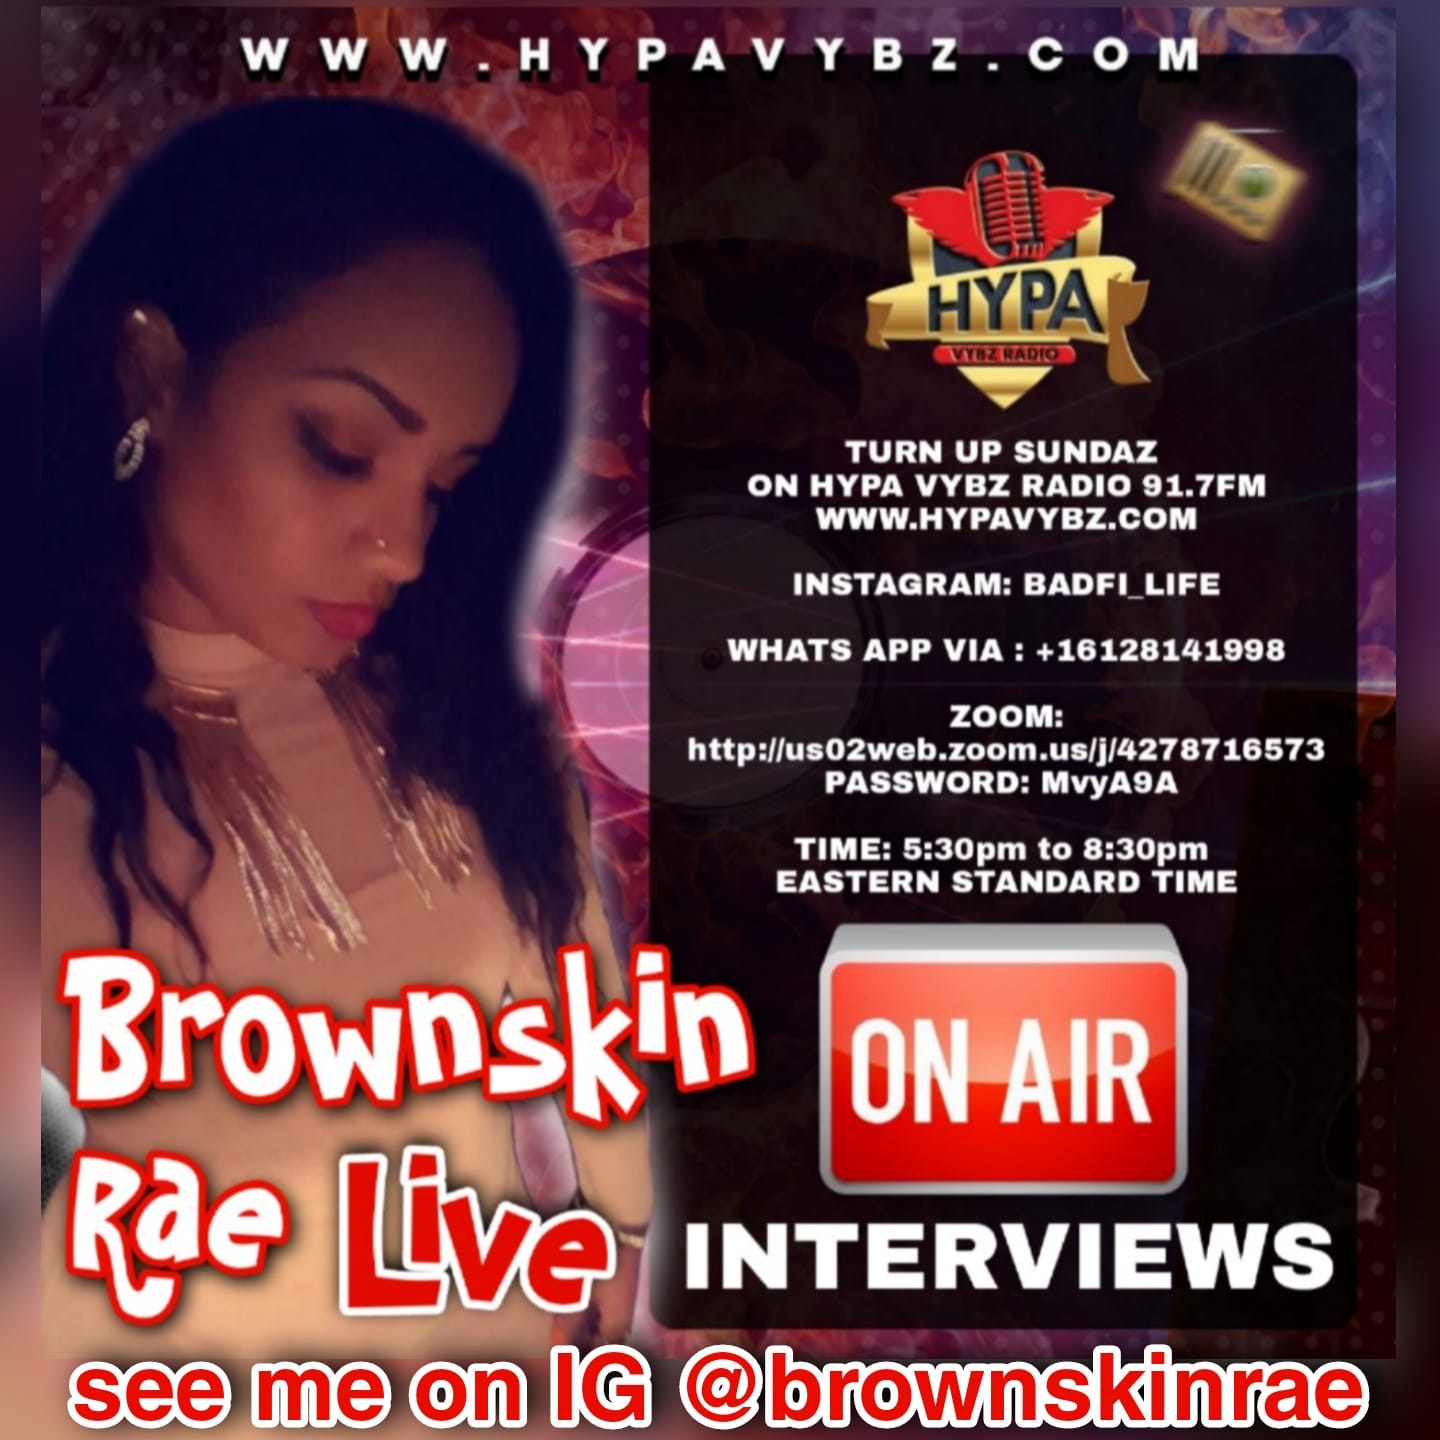 live interview this sunday